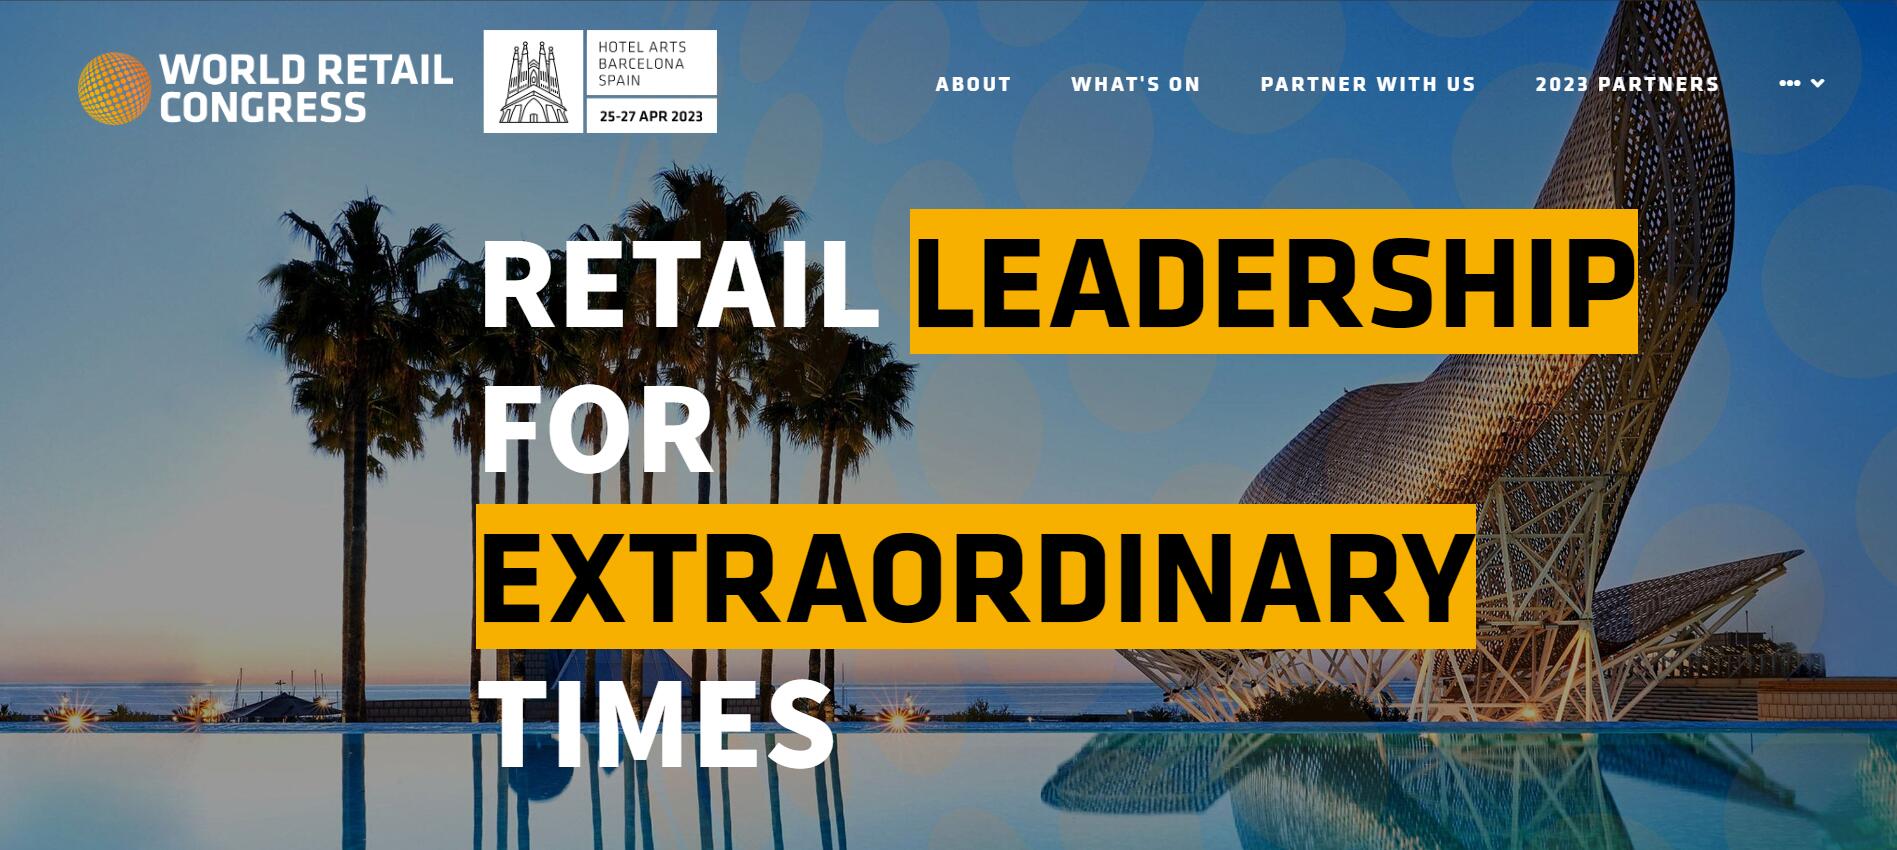 World Retail Congress Acquired by William Reed Ltd to Be Held in Barcelona End of April